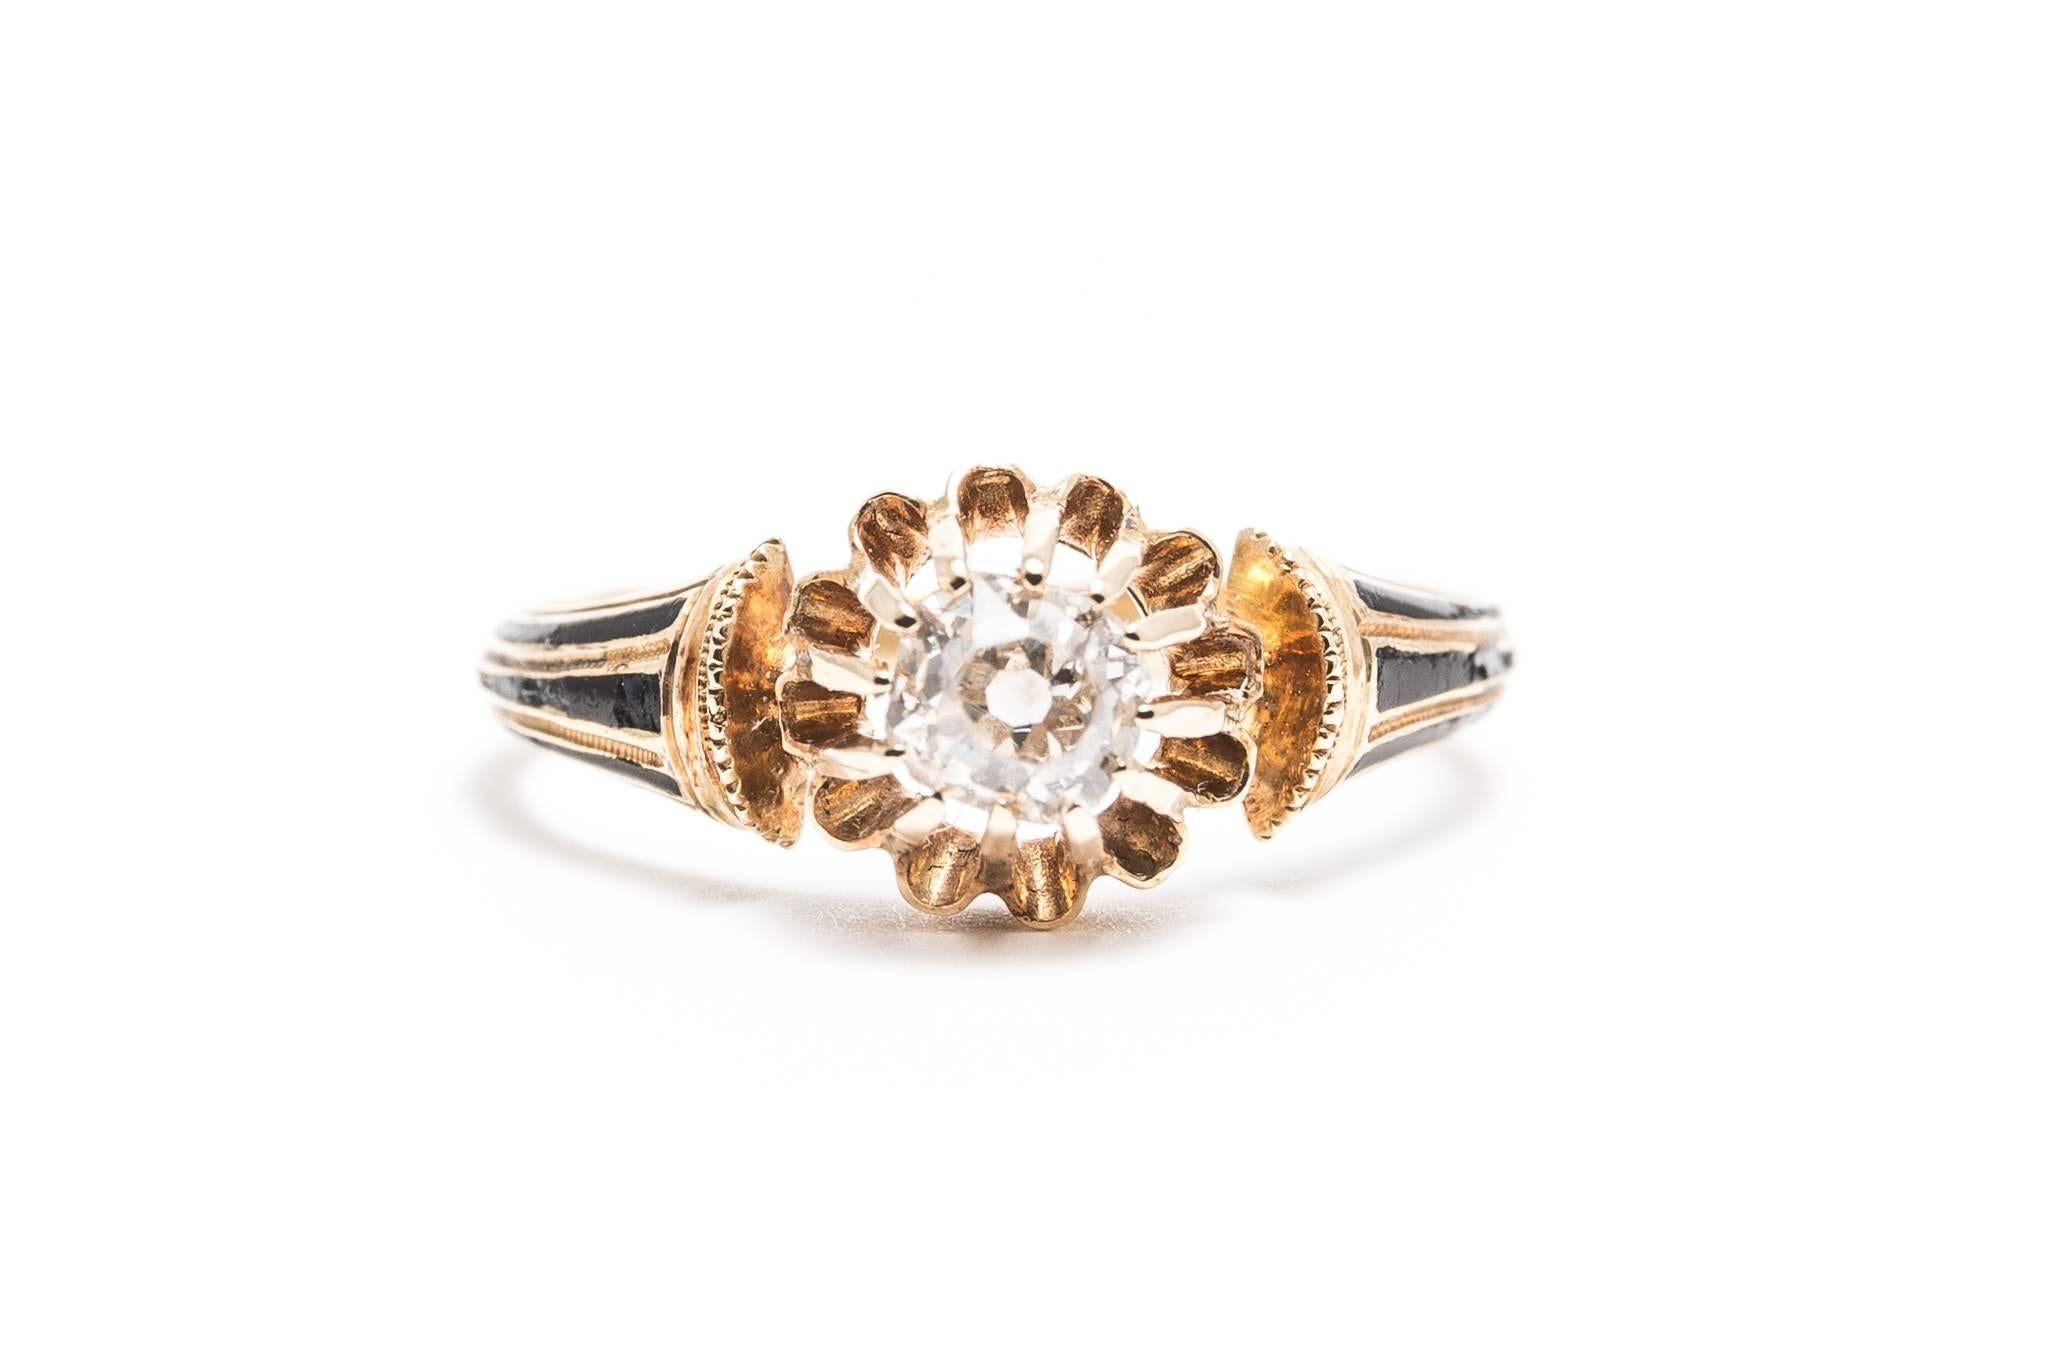 Beacon Hill Jewelers Presents:

An original early 19th century Georgian period enameled engagement ring in 18 karat yellow gold. Centered by an approximately 0.35 carat old Mine cut diamond this ring features vertical black enameling and a